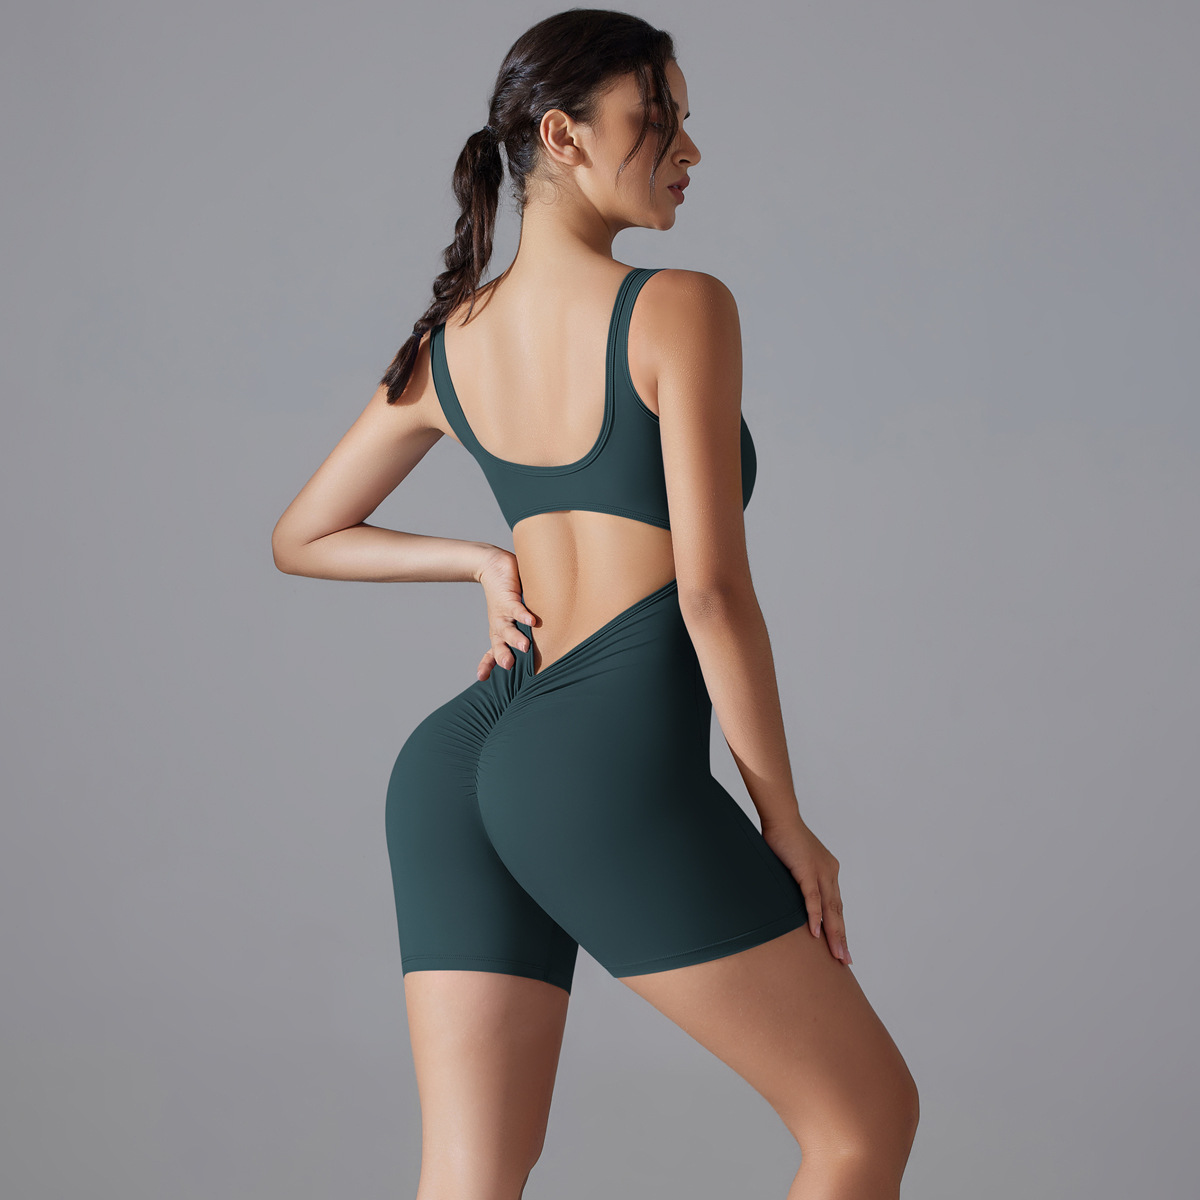 activewear private label